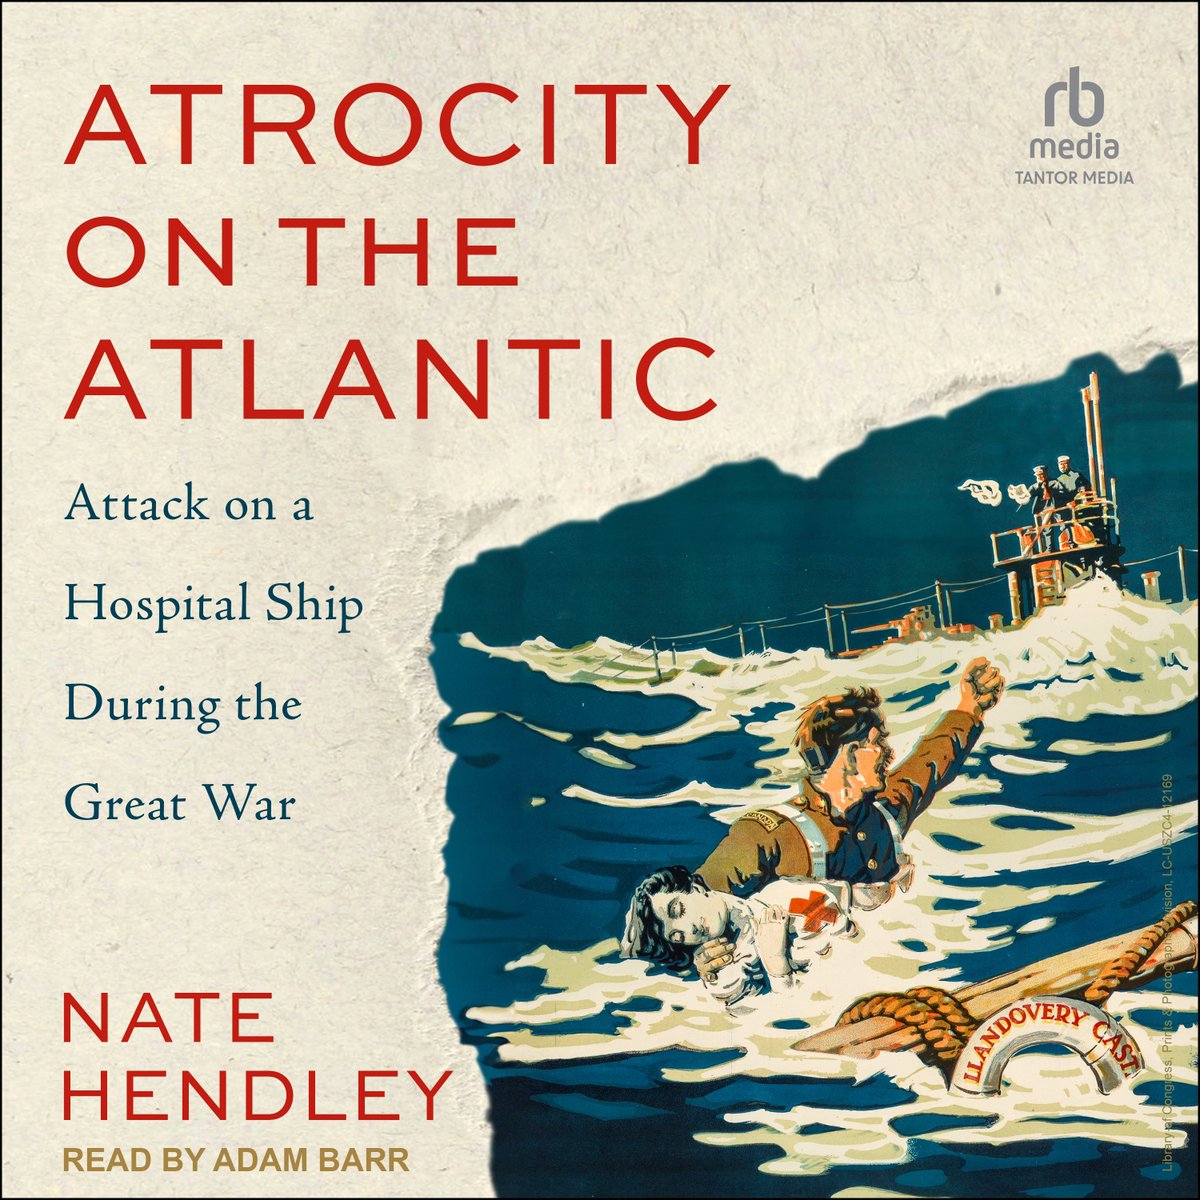 Access the audiobook of Atrocity on the Atlantic for free w/a @torontolibrary card at tinyurl.com/3fedkrrh Or buy the audiobook at: Amazon tinyurl.com/4utr759x Apple tinyurl.com/p9jf9jvx Audible tinyurl.com/mr327zwu @dundurnpress @TantorAudio #audiobooks #WW1